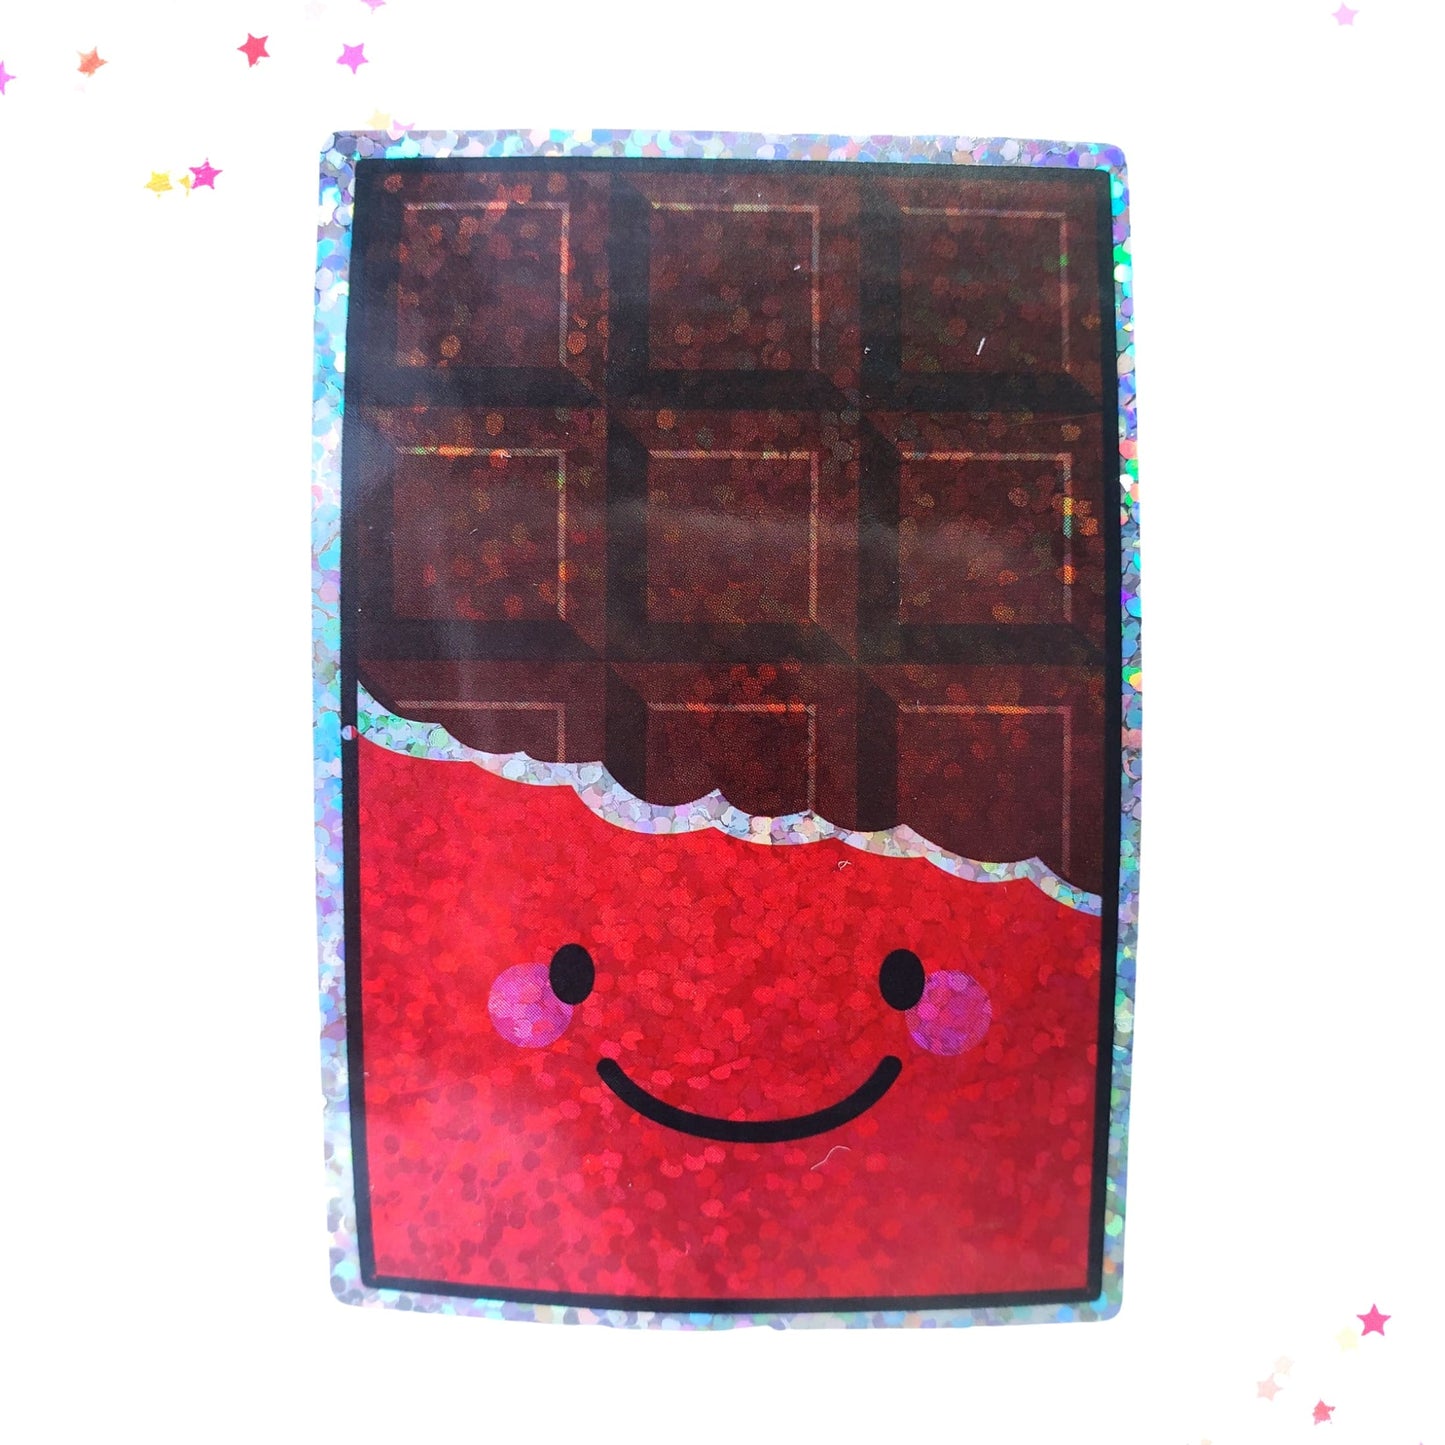 Premium Sticker - Sparkly Holographic Glitter Chocolate Bar from Confetti Kitty, Only 2.00